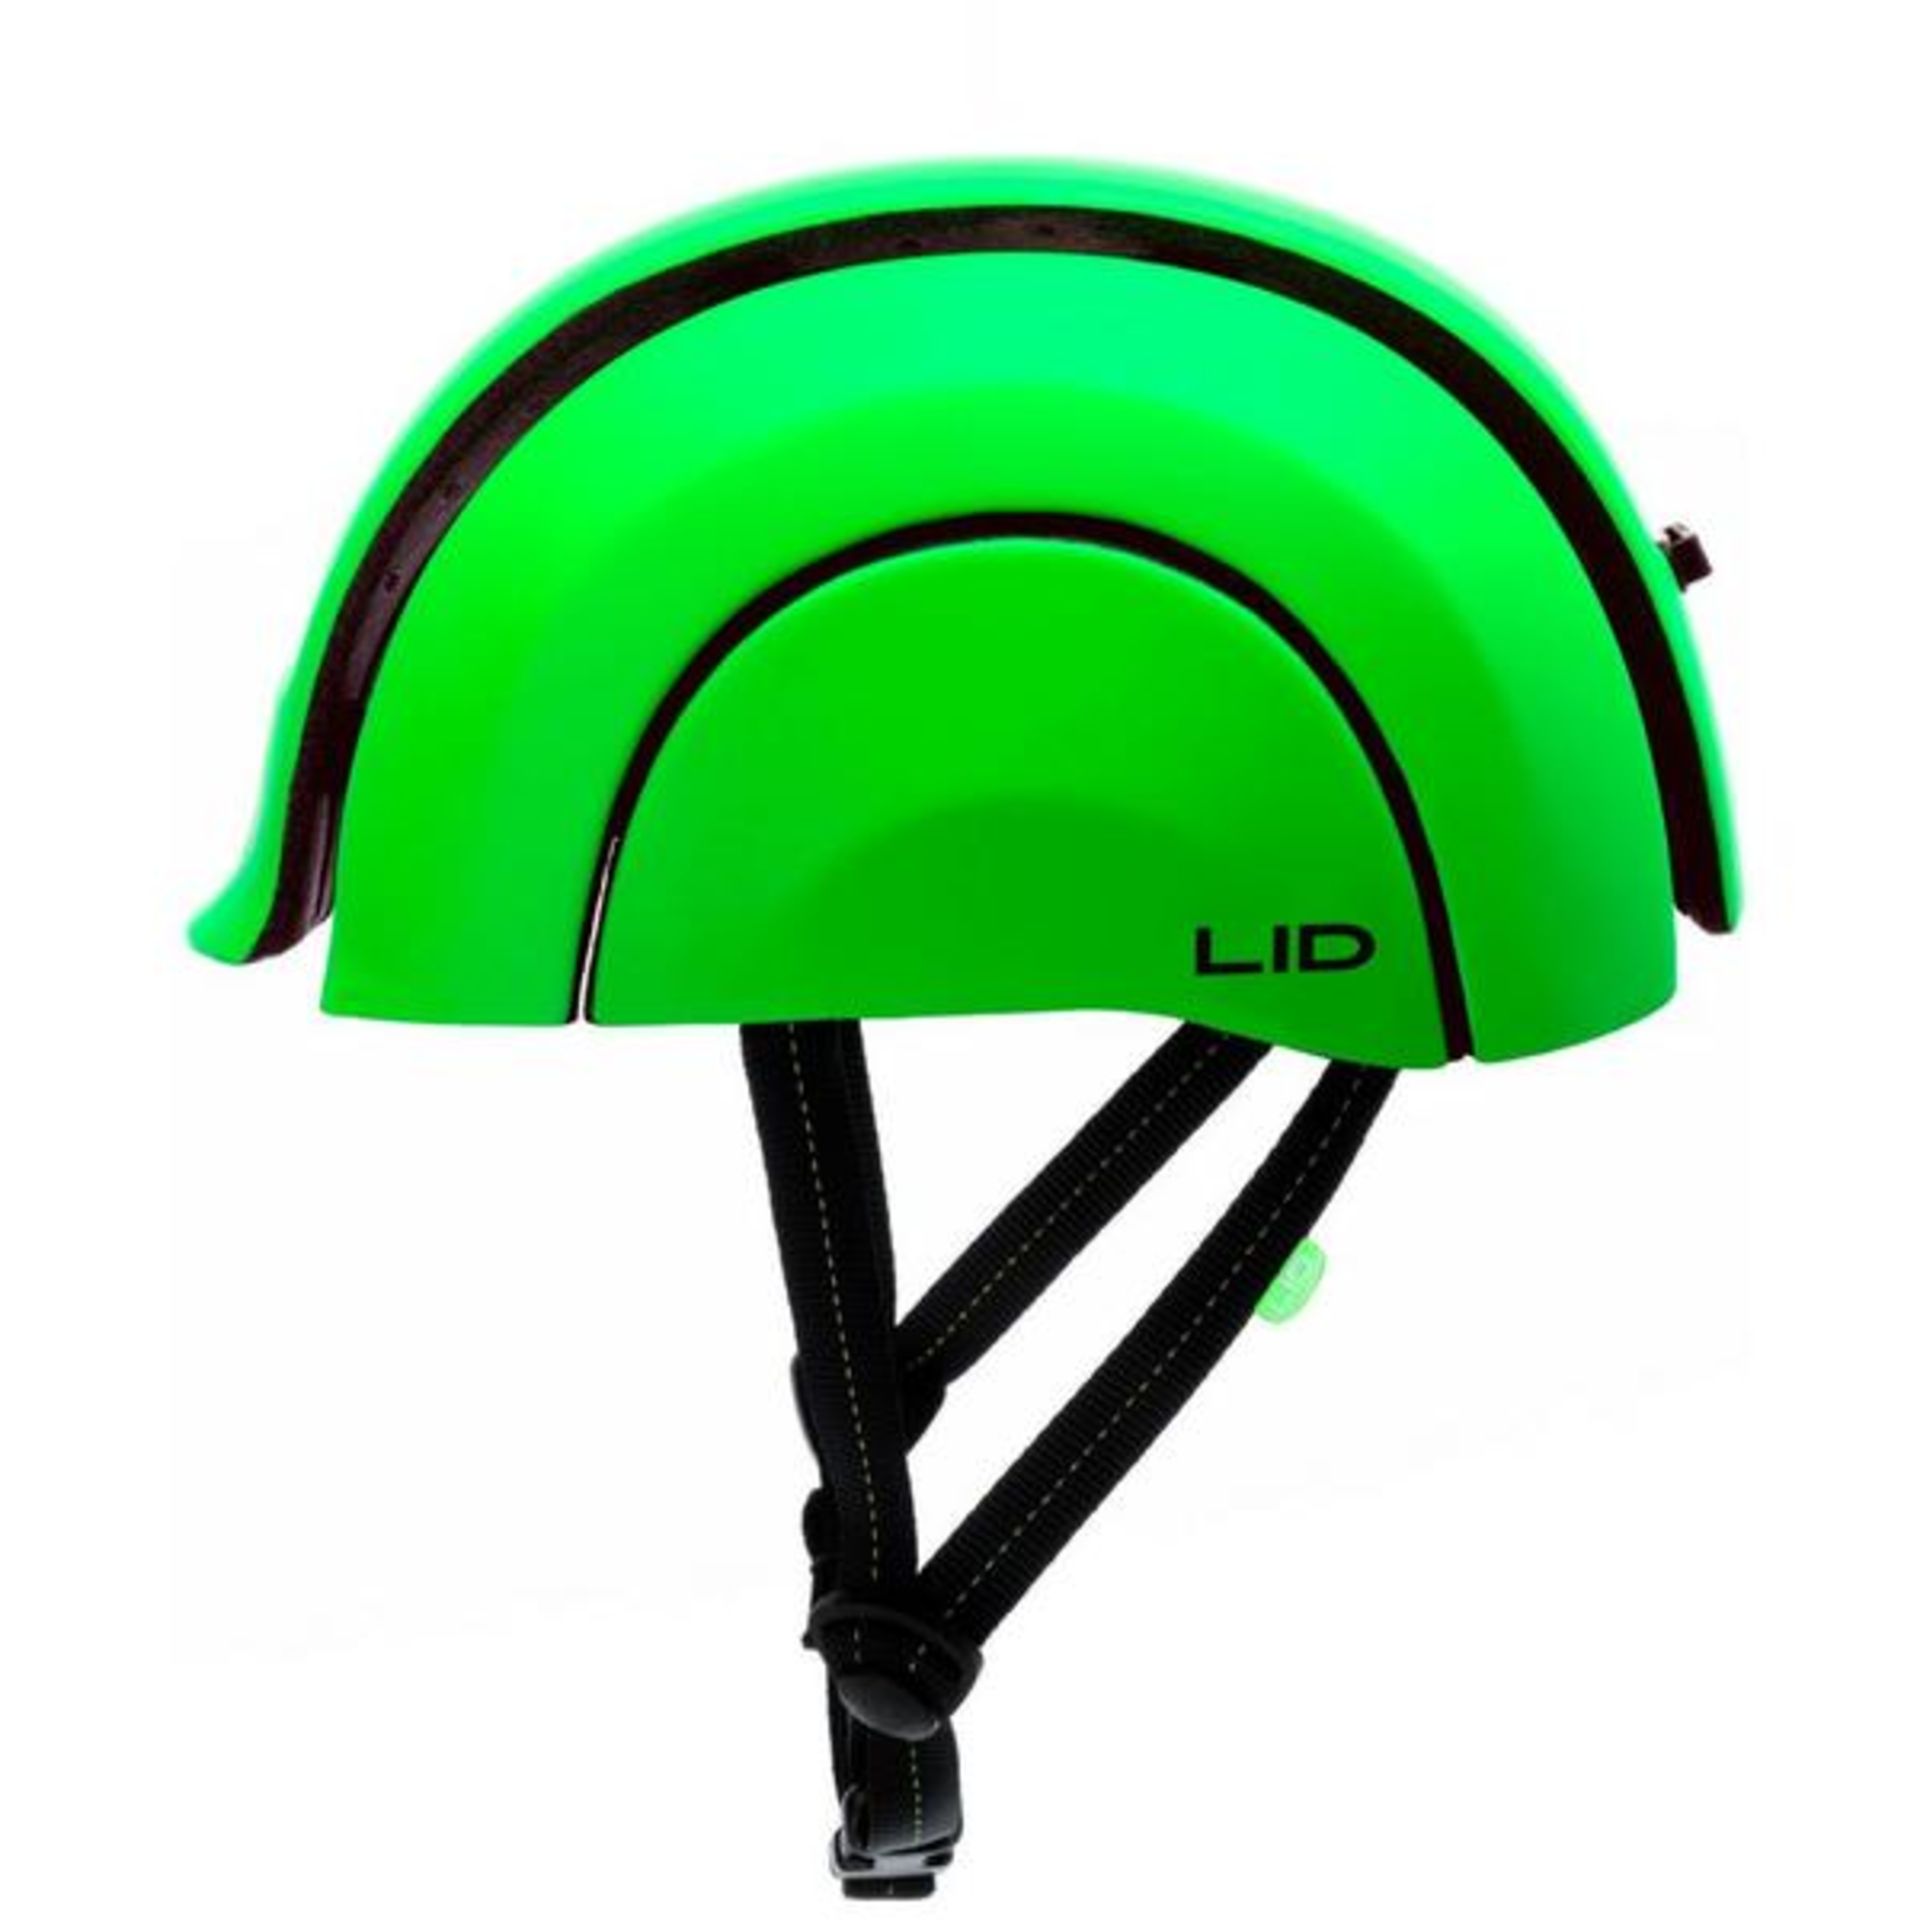 Lid Helmet Liquidation - Over £153k at retail - All new and boxed - Image 9 of 23